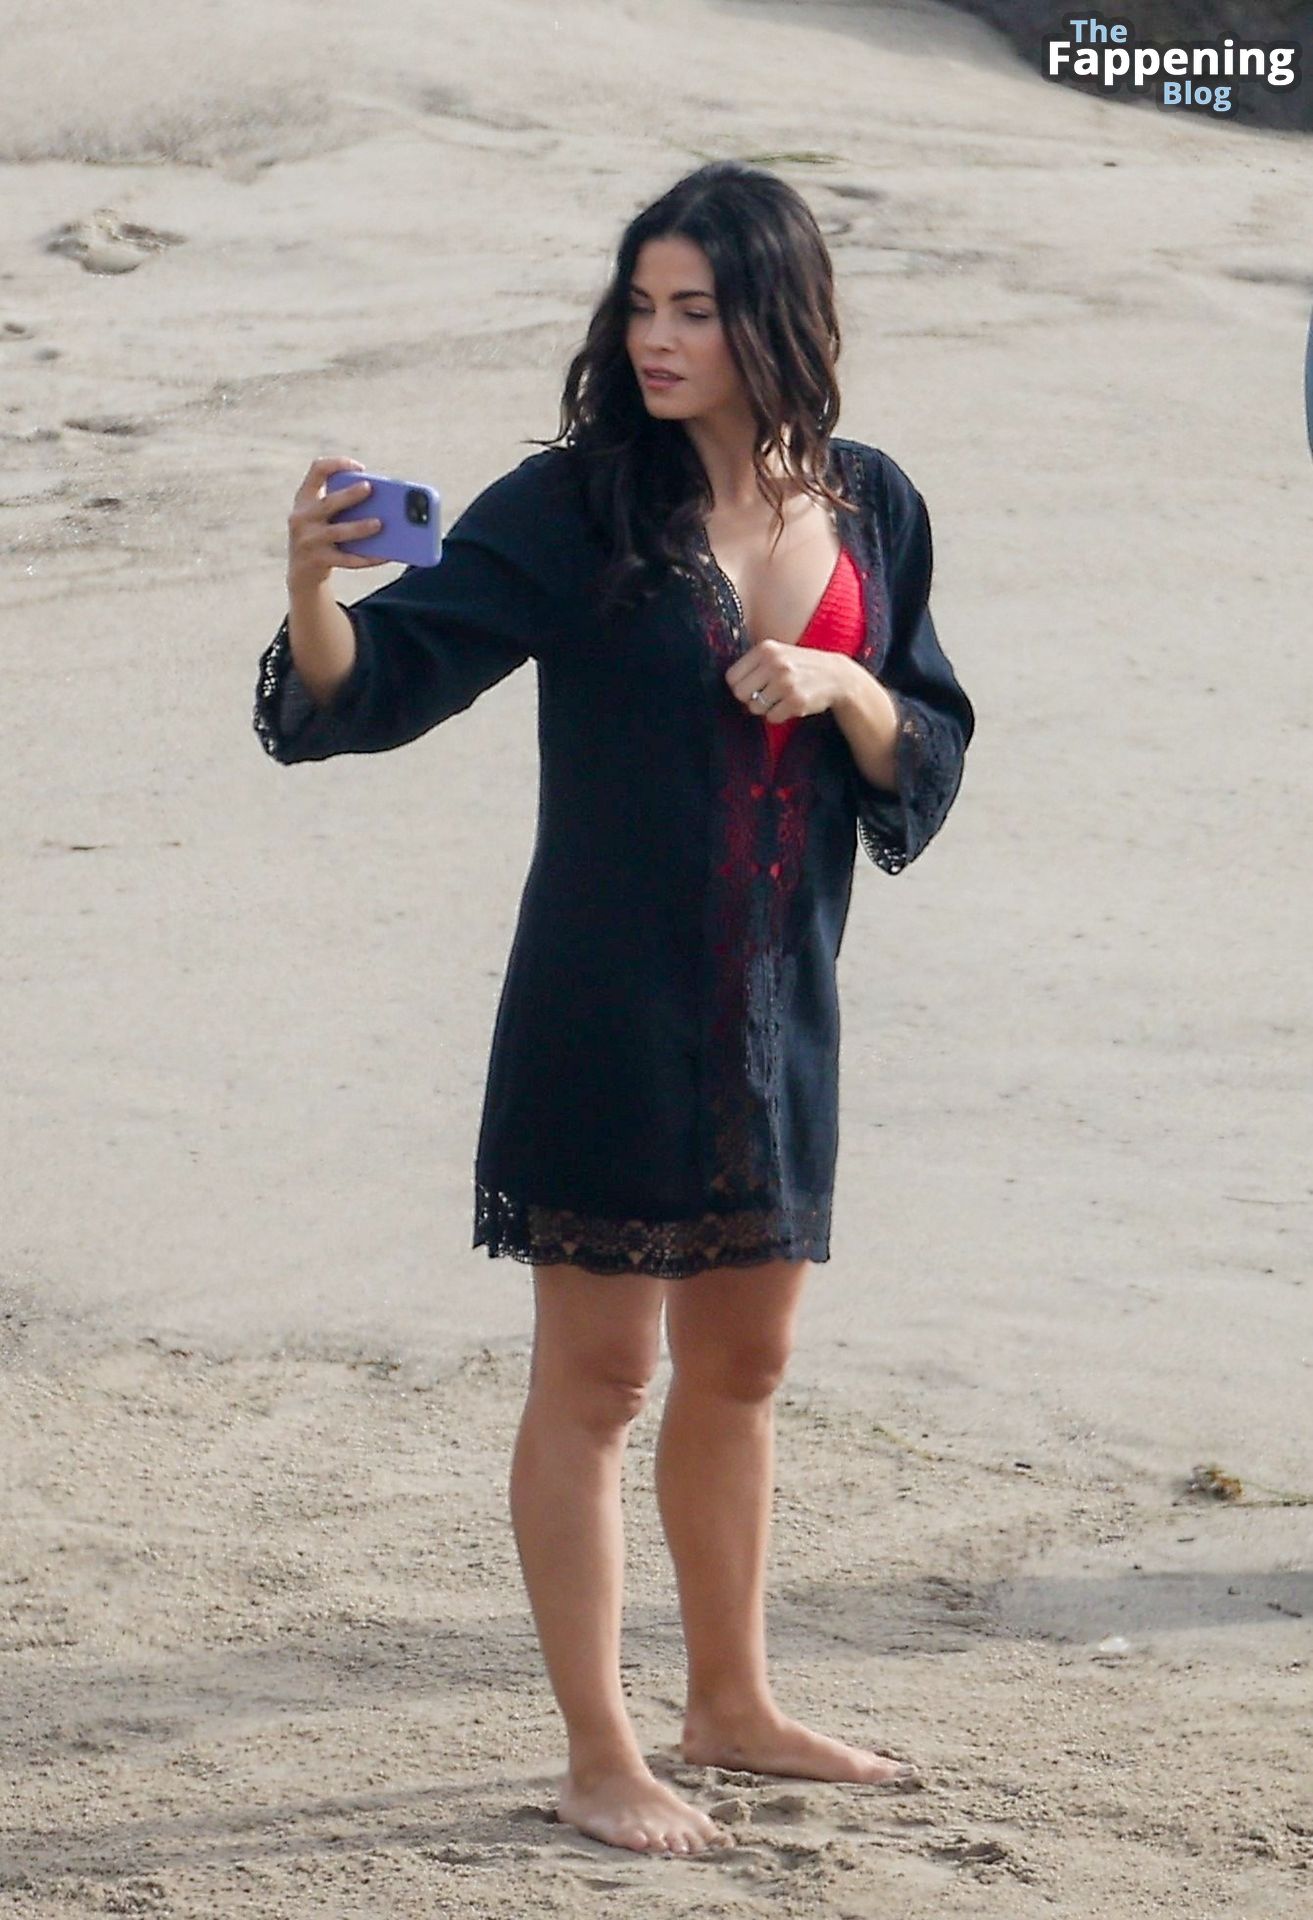 Jenna Dewan Plays a Pregnant Woman in Scenes for “The Rookie” with Nathan Fillion in Malibu (172 Photos)